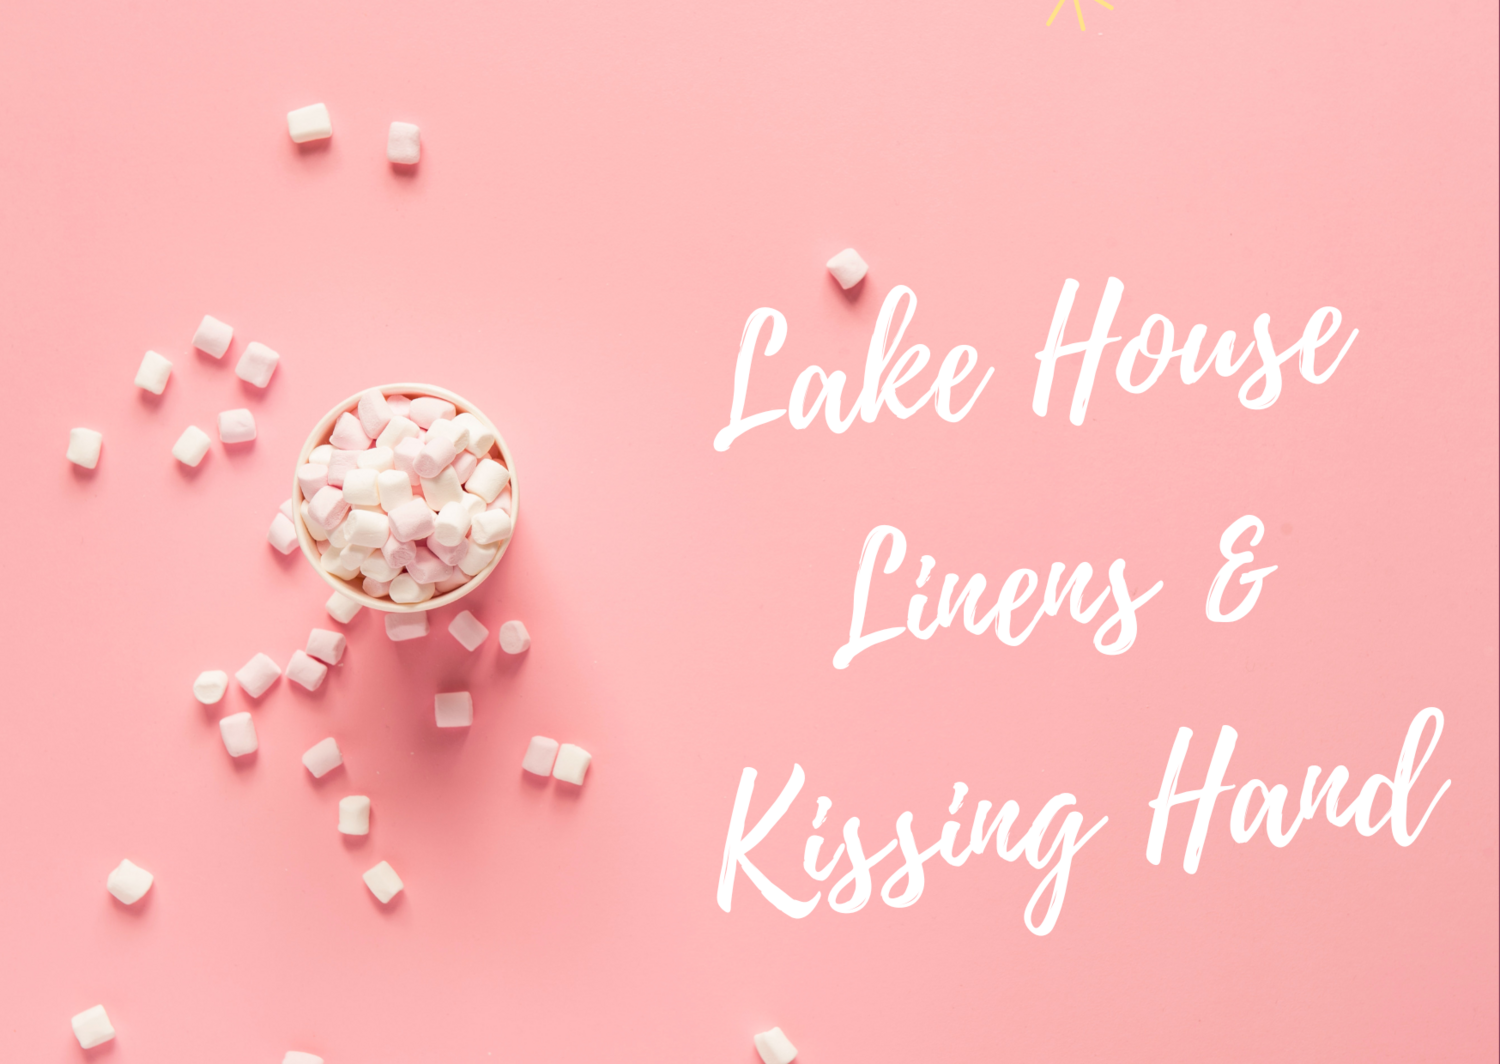 Lake House Linen &amp; The Kissing Hand Loaf